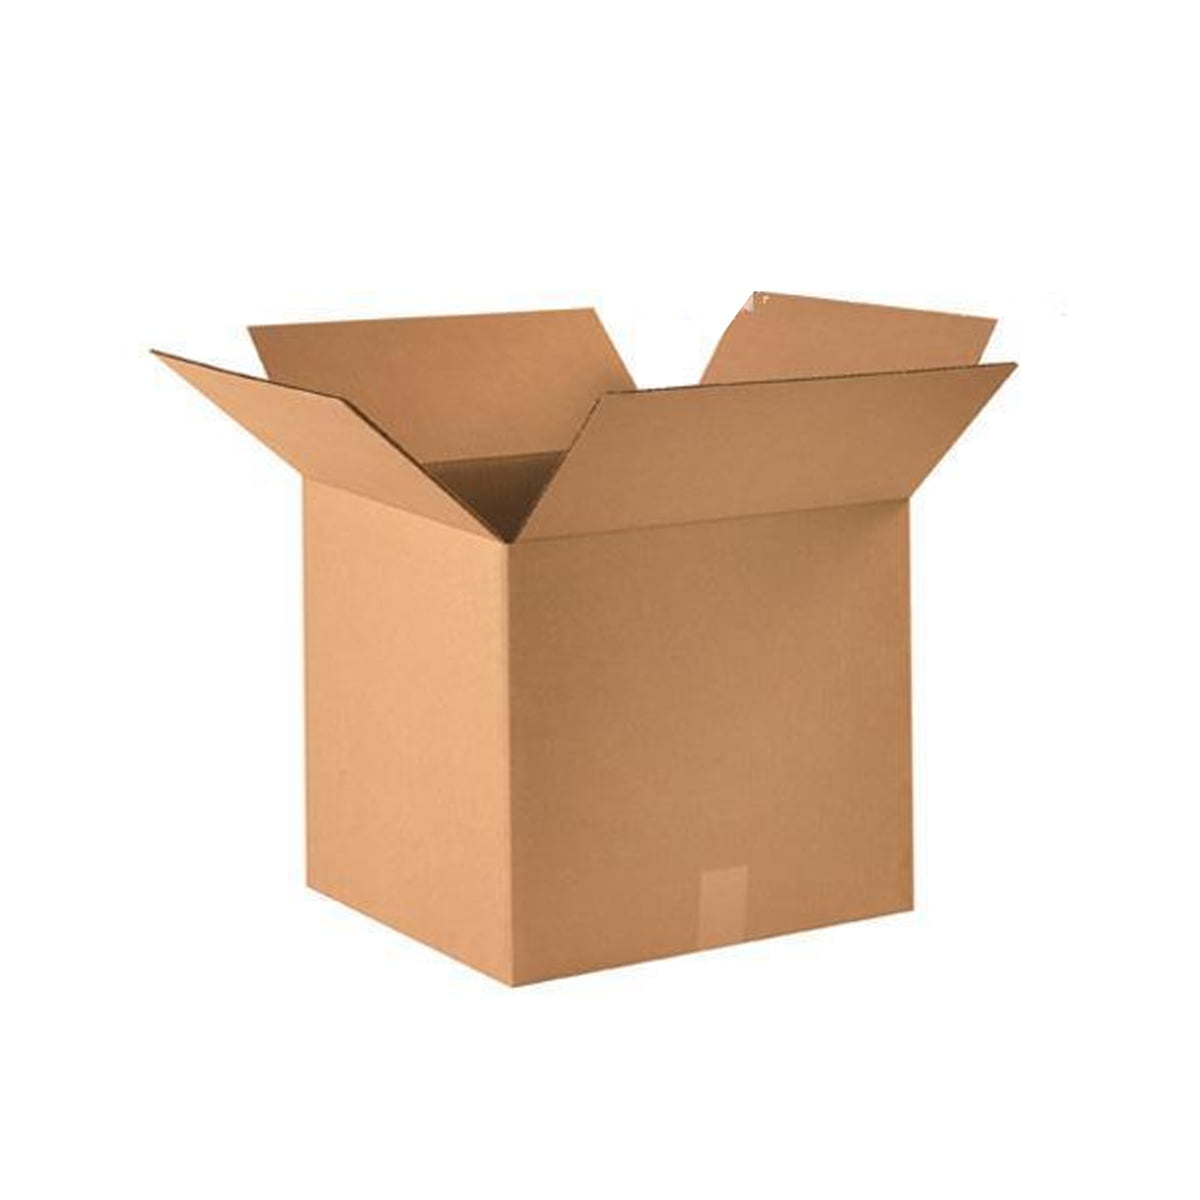 25 10x6x5 Cardboard Shipping Boxes Cartons Packing Moving Mailing Box 